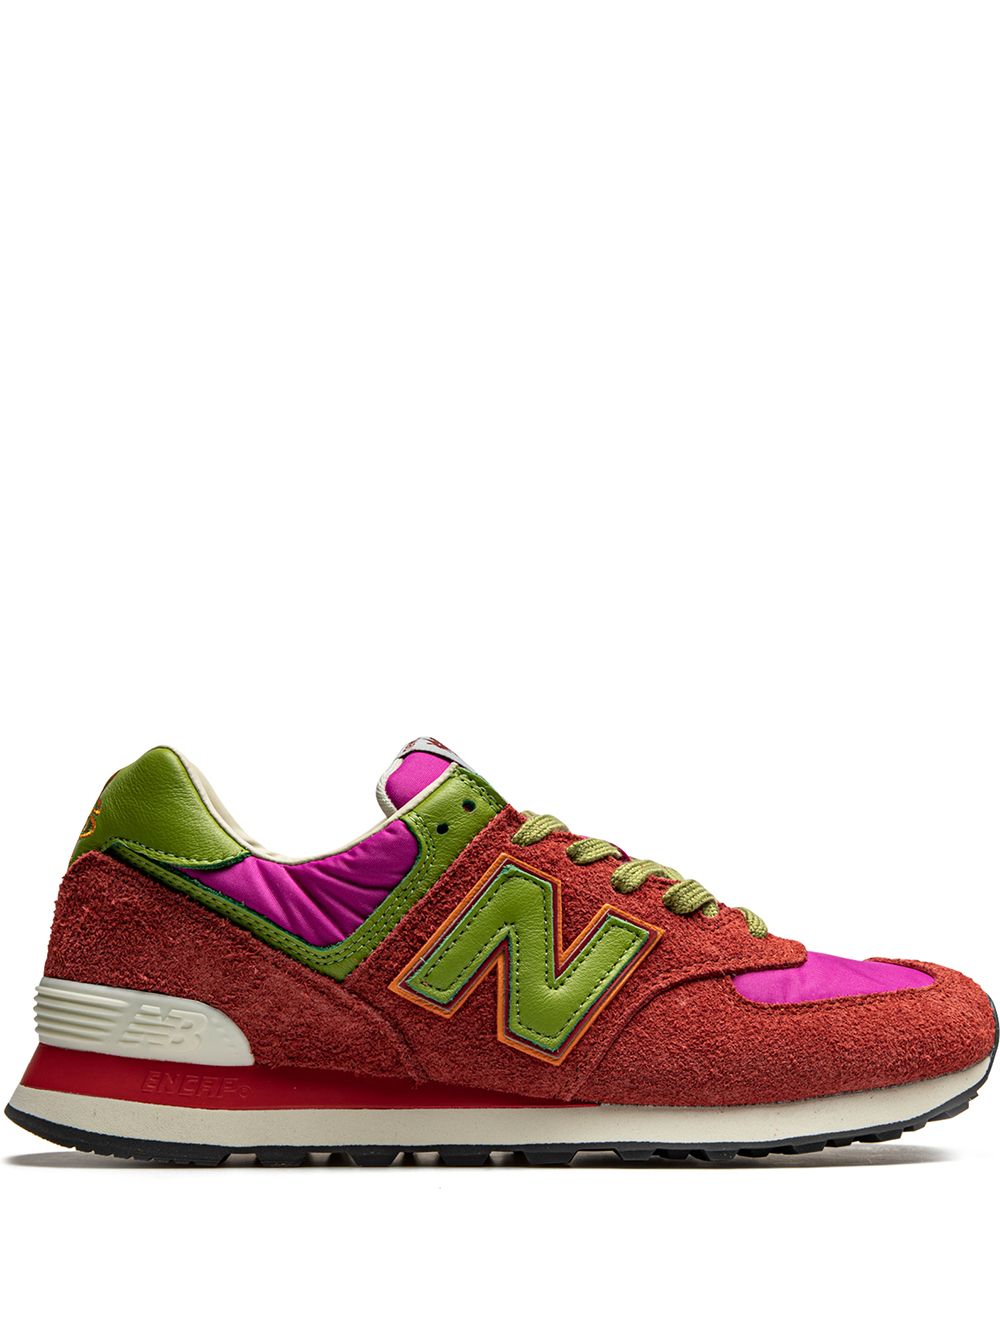 New Balance x Stray Rats ML574RAT sneakers - Red